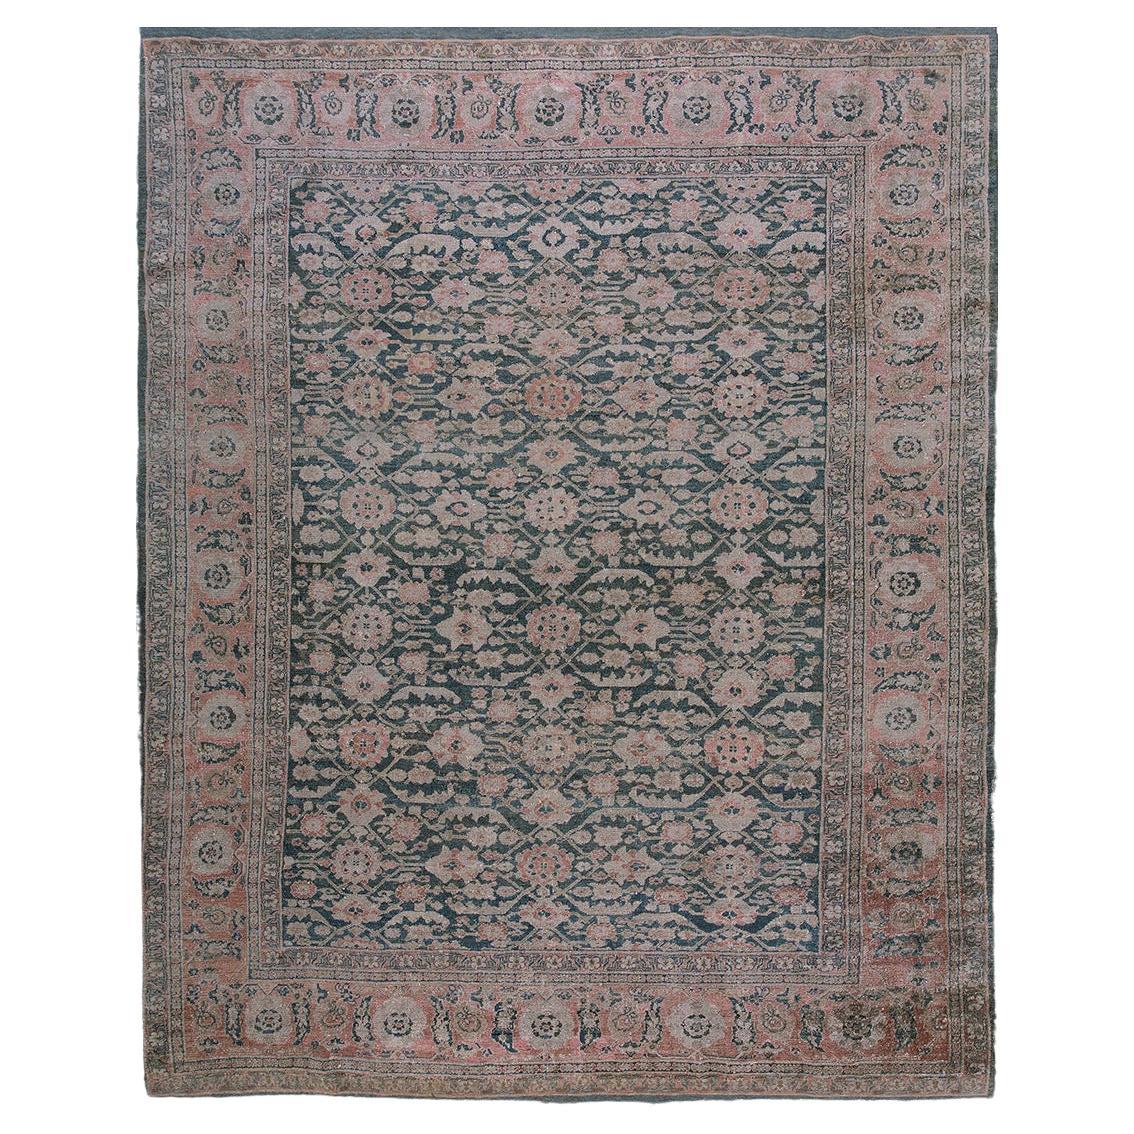 Early 20th Century Persian Malayer Carpet 8' 10" x 11' 3" For Sale